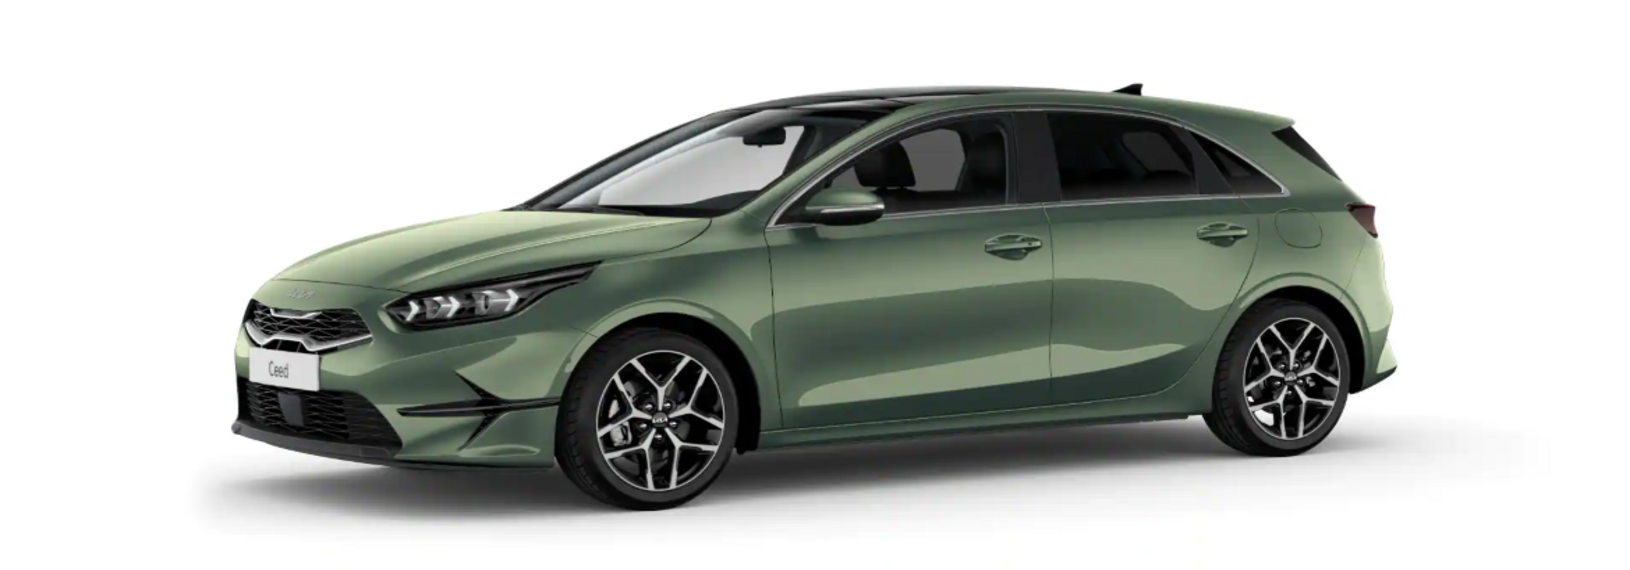 Kia Ceed 1.0 T-GDi 100PS Edition 7 | Privatleasing-Aktion